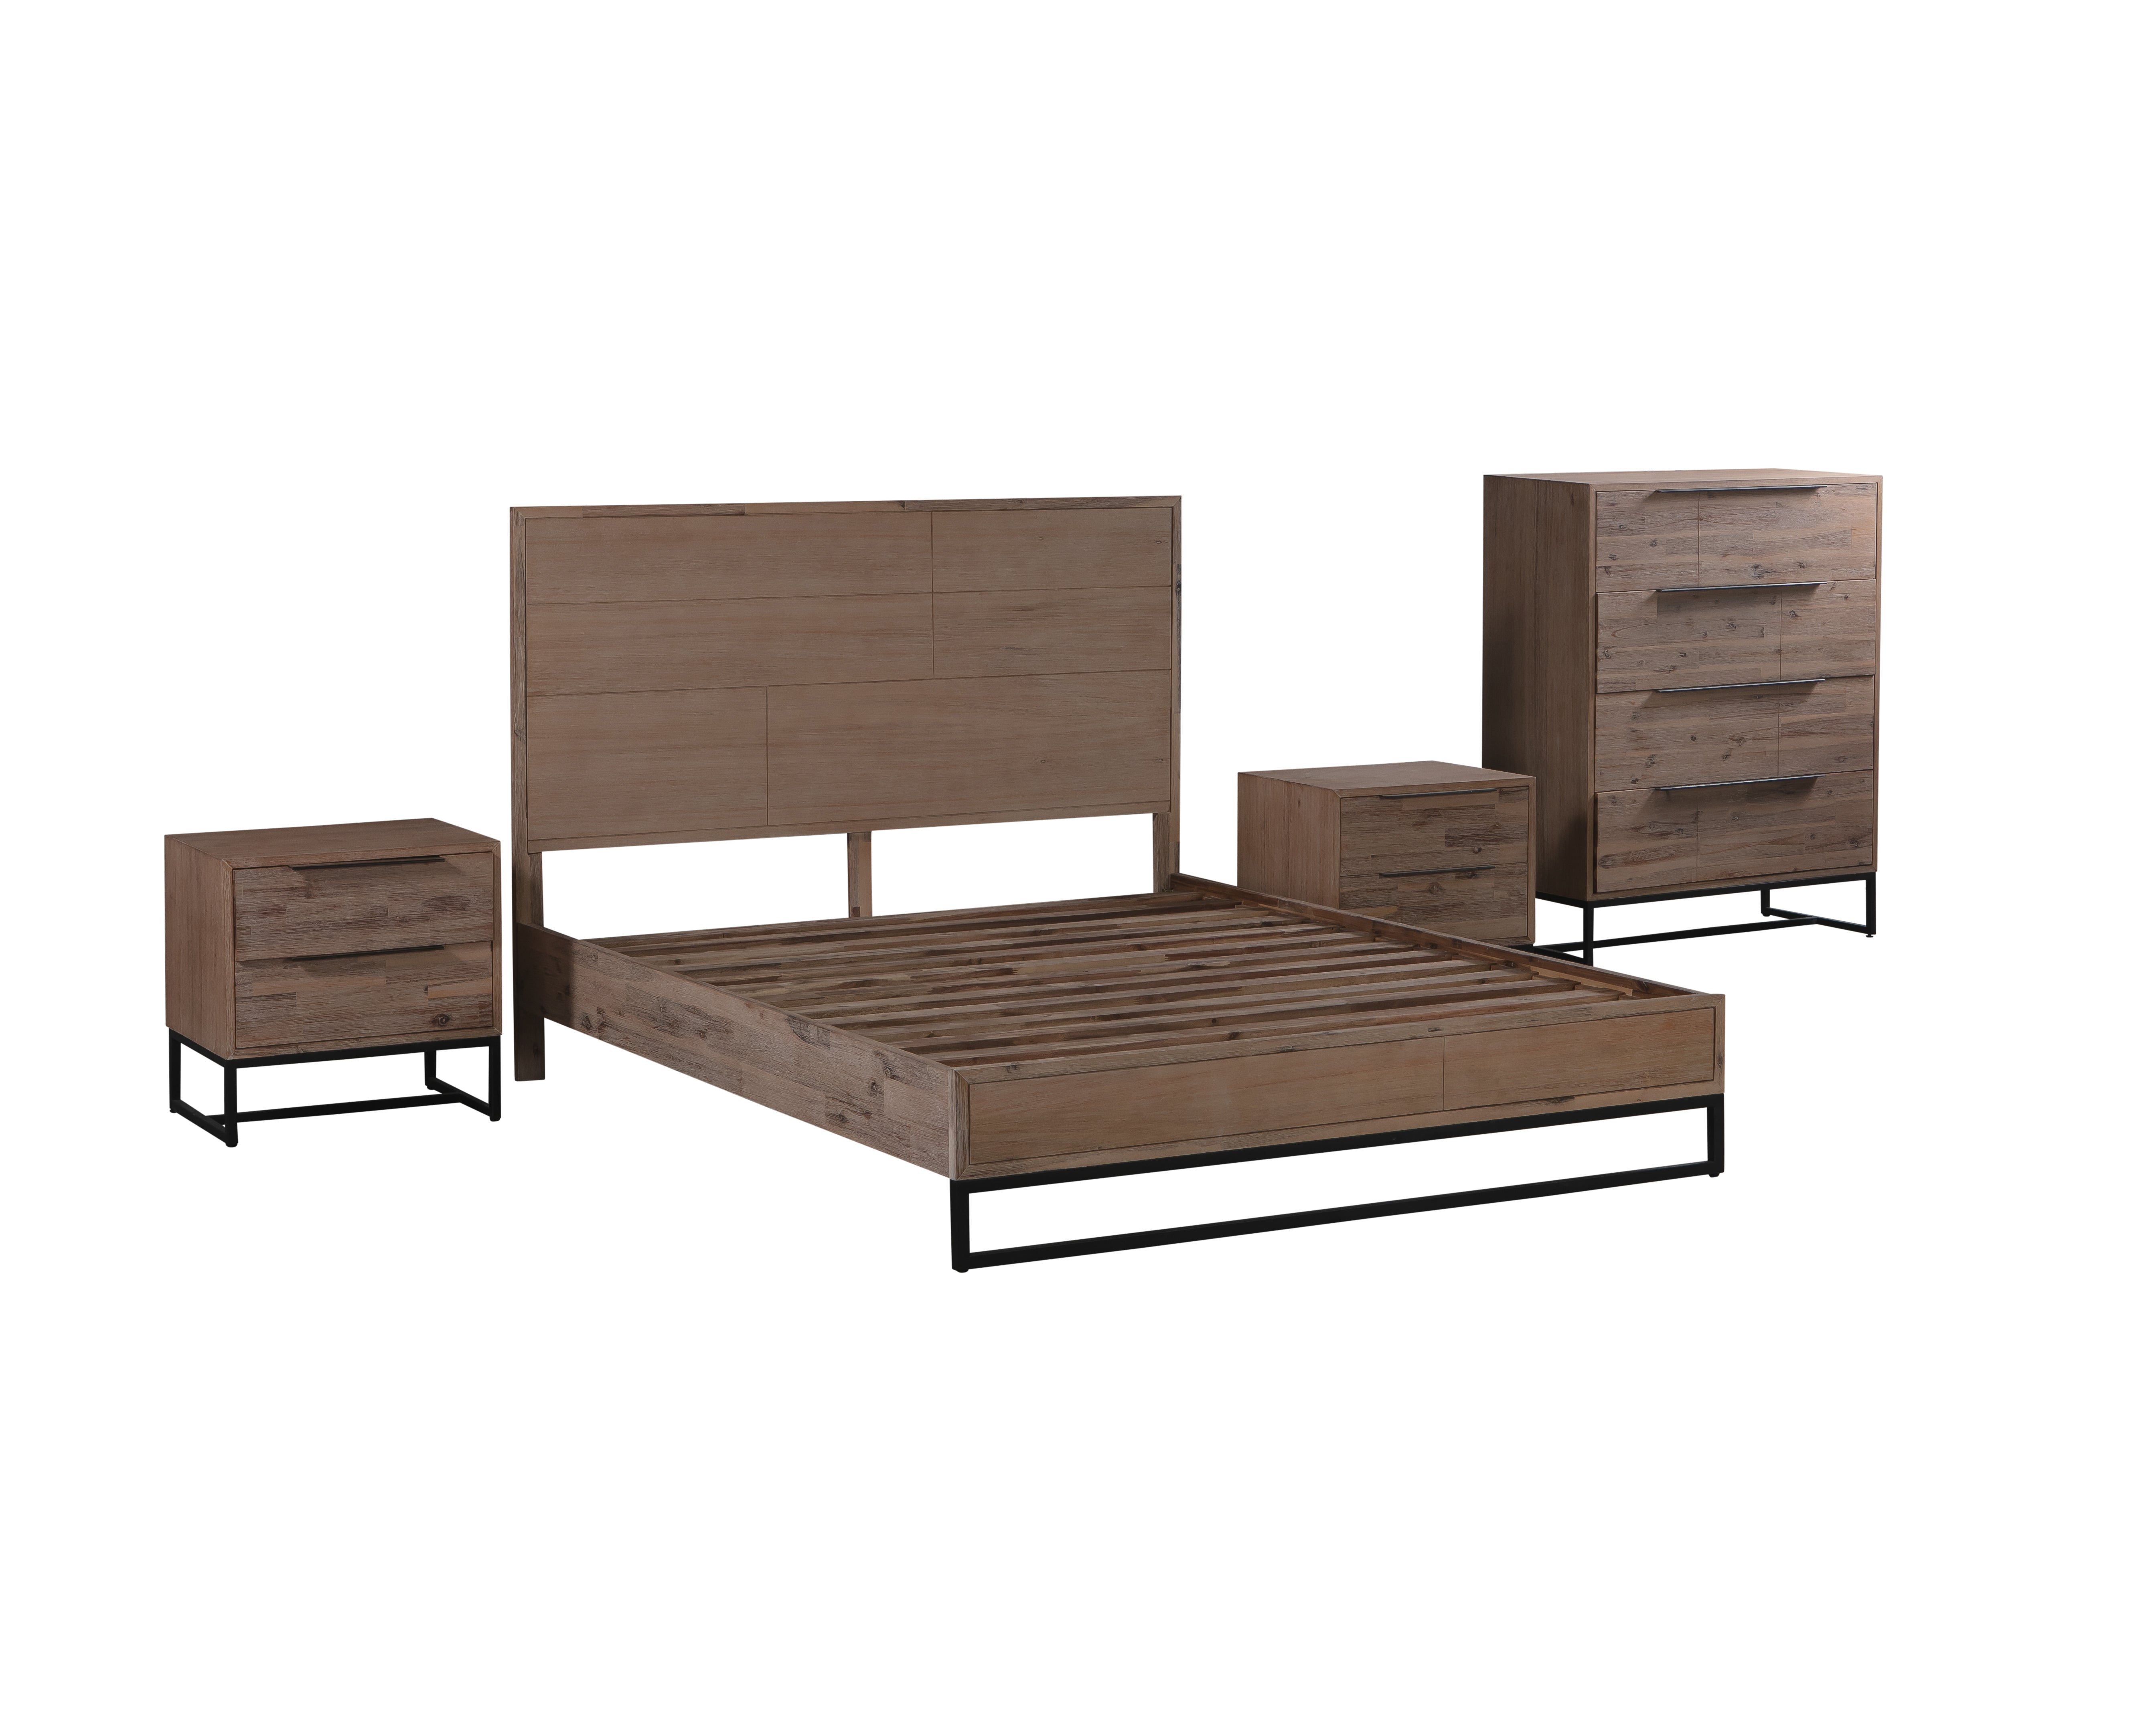 4 Pieces Bedroom Suite made in Solid Wood Acacia Veneered King Size Oak Colour 1X Bed, 2X Bedside Table & 1X Tallboy - SILBERSHELL